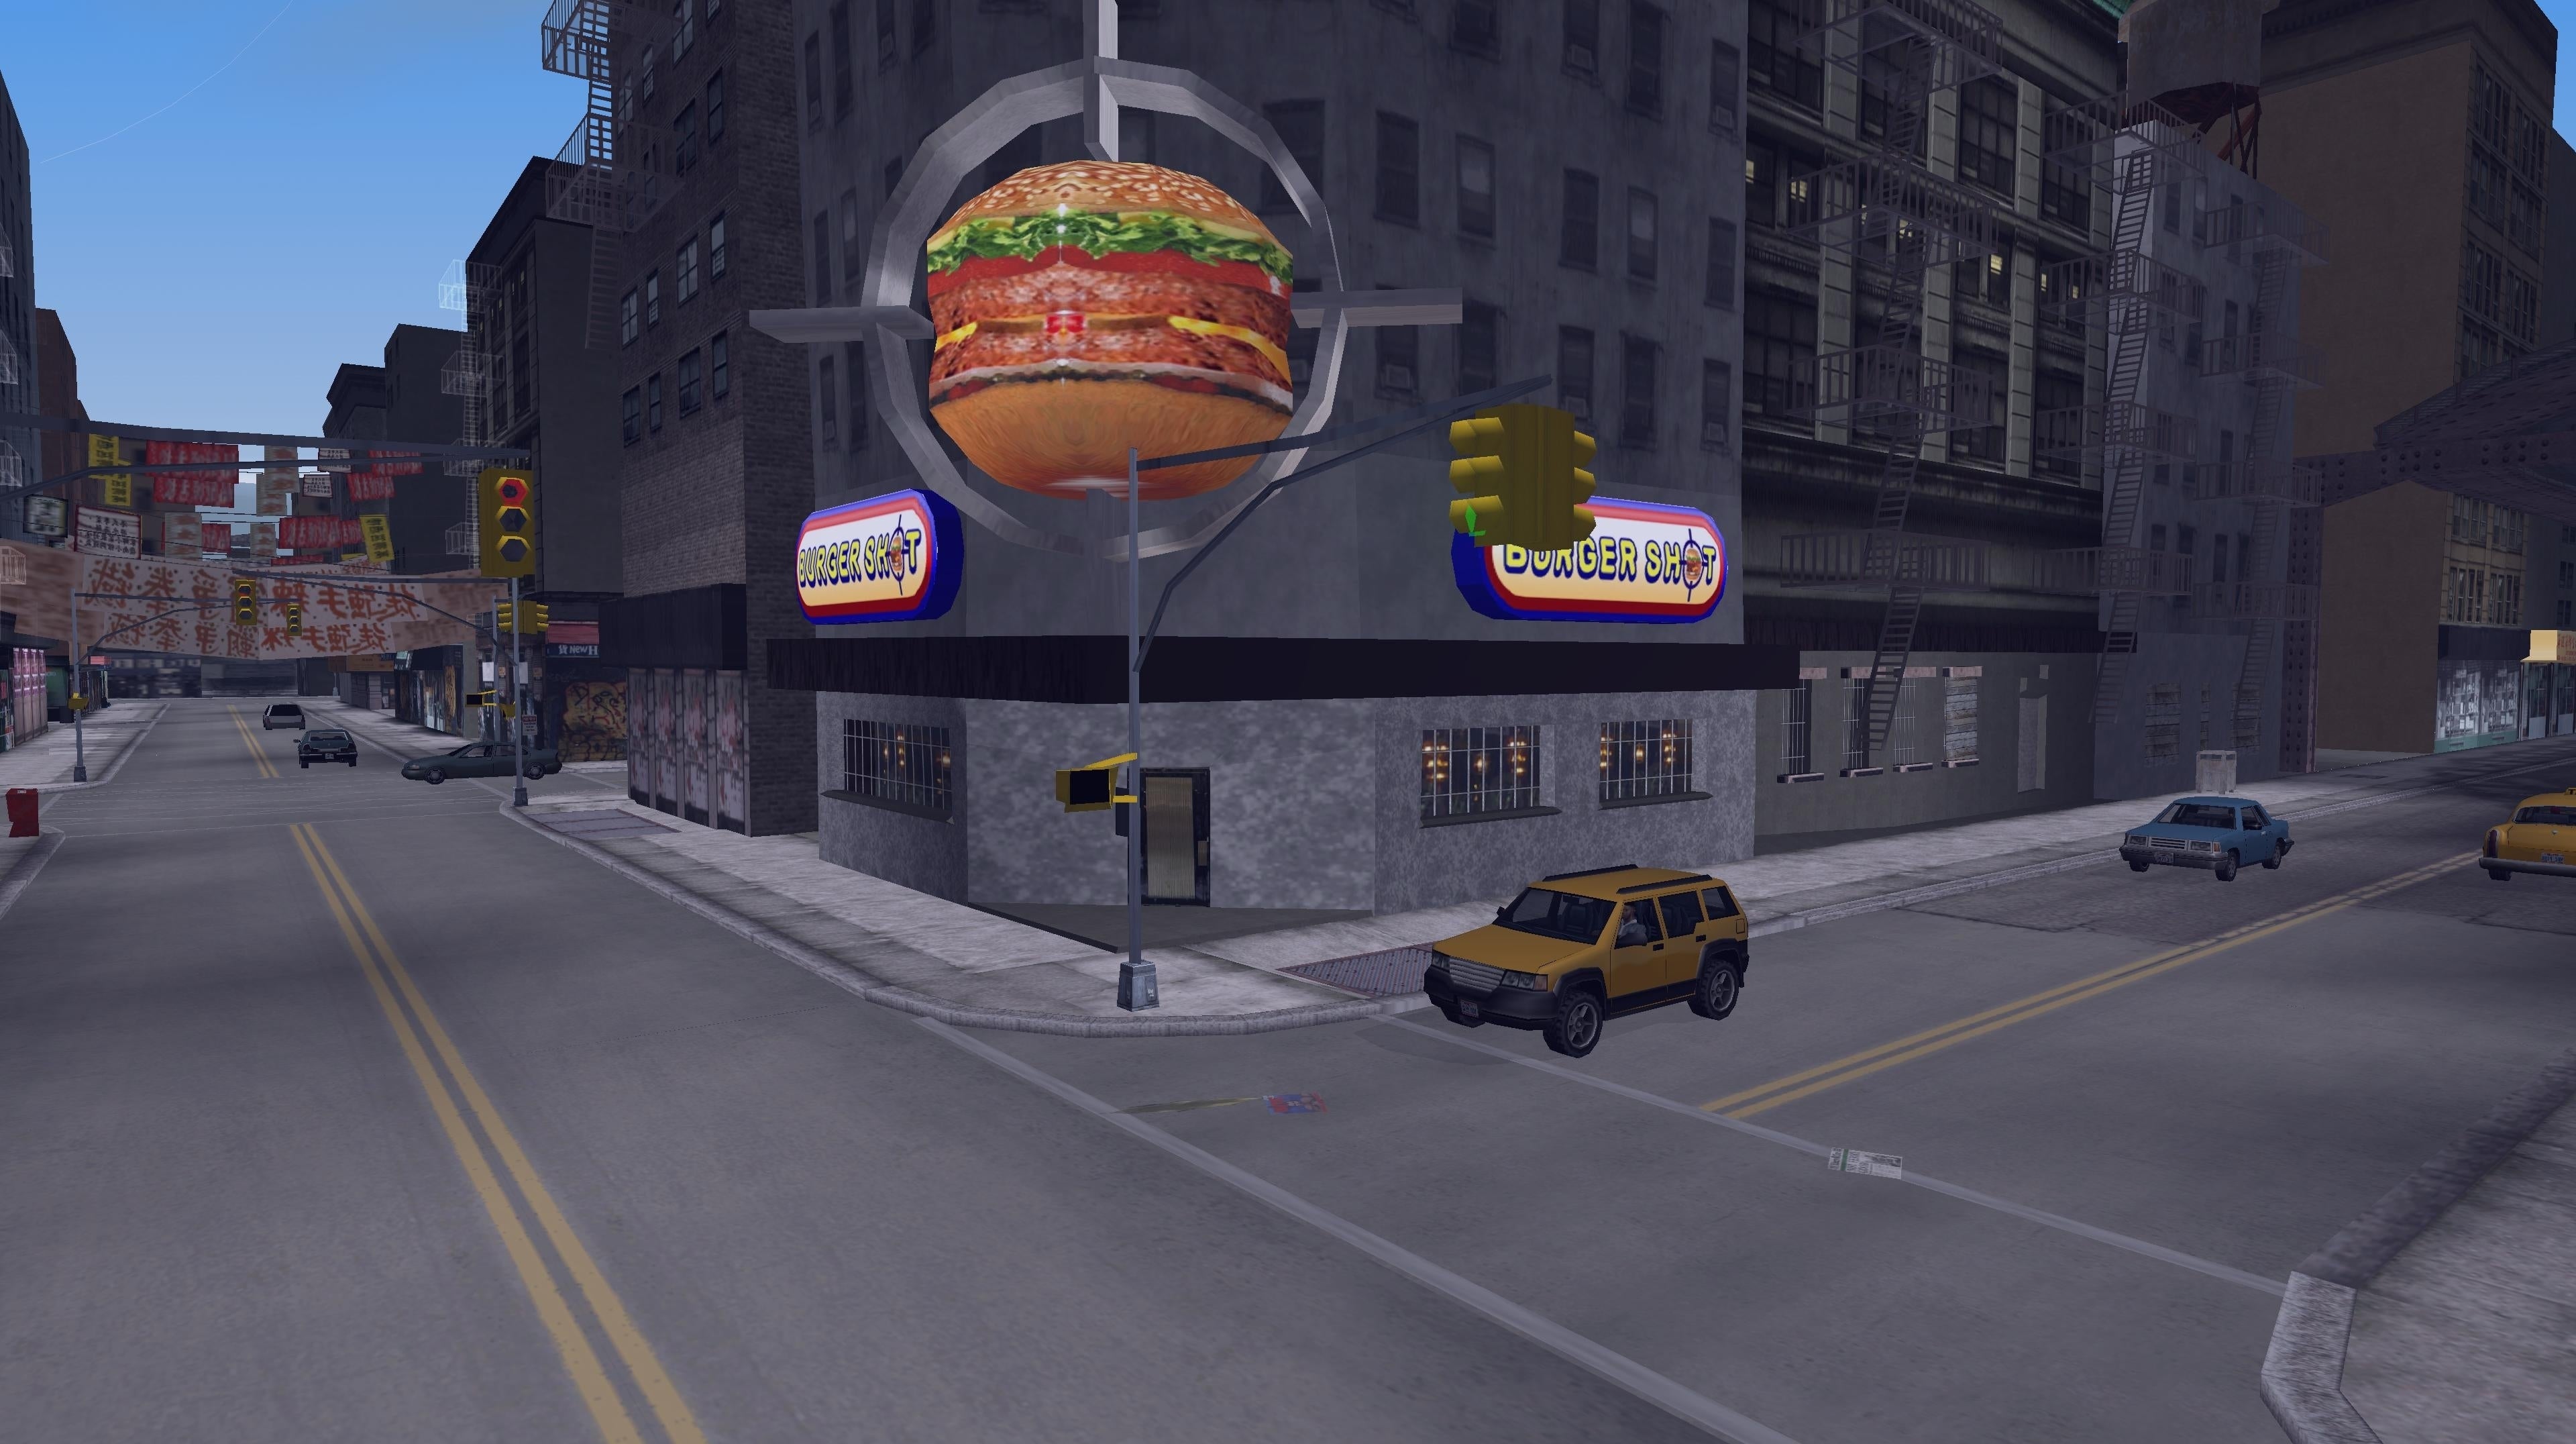 Image for Makers of ambitious Rockstar '3D universe' GTA San Andreas mod cease development themselves "due to increasing hostility towards modding community"